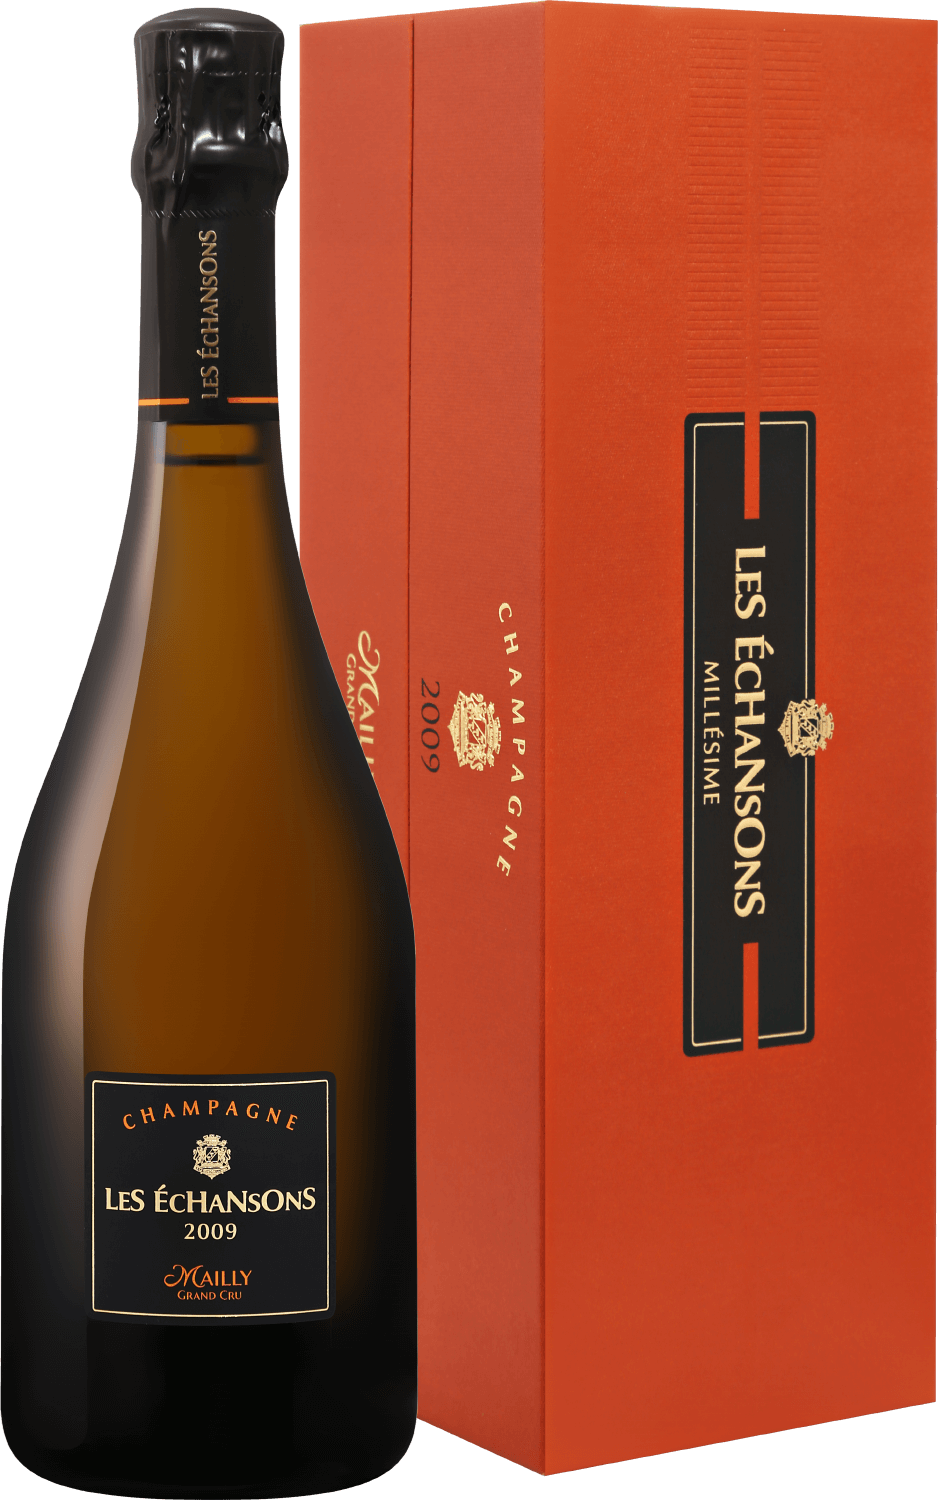 Mailly Grand Cru Les Échansons Brut Millesime Champagne AOC (gift box) andre beaufort ambonnay grand cru millesime champagne aoc